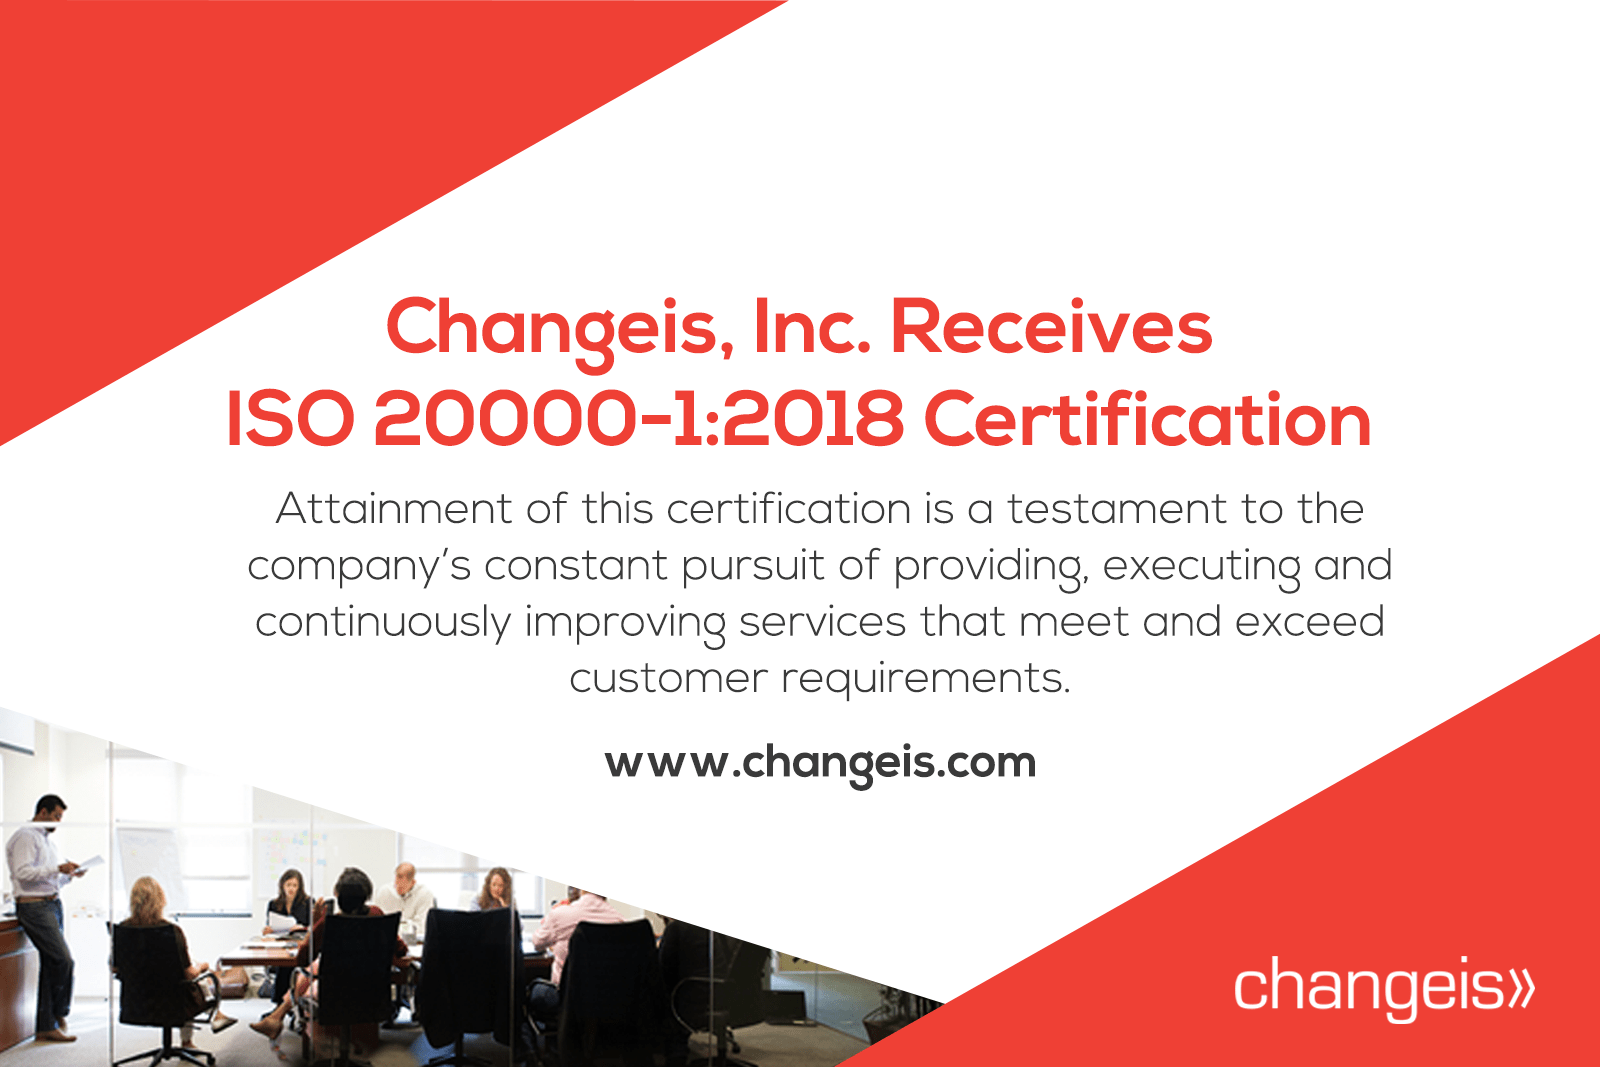 Changeis, Inc. Receives ISO 20000-1:2018 Certification